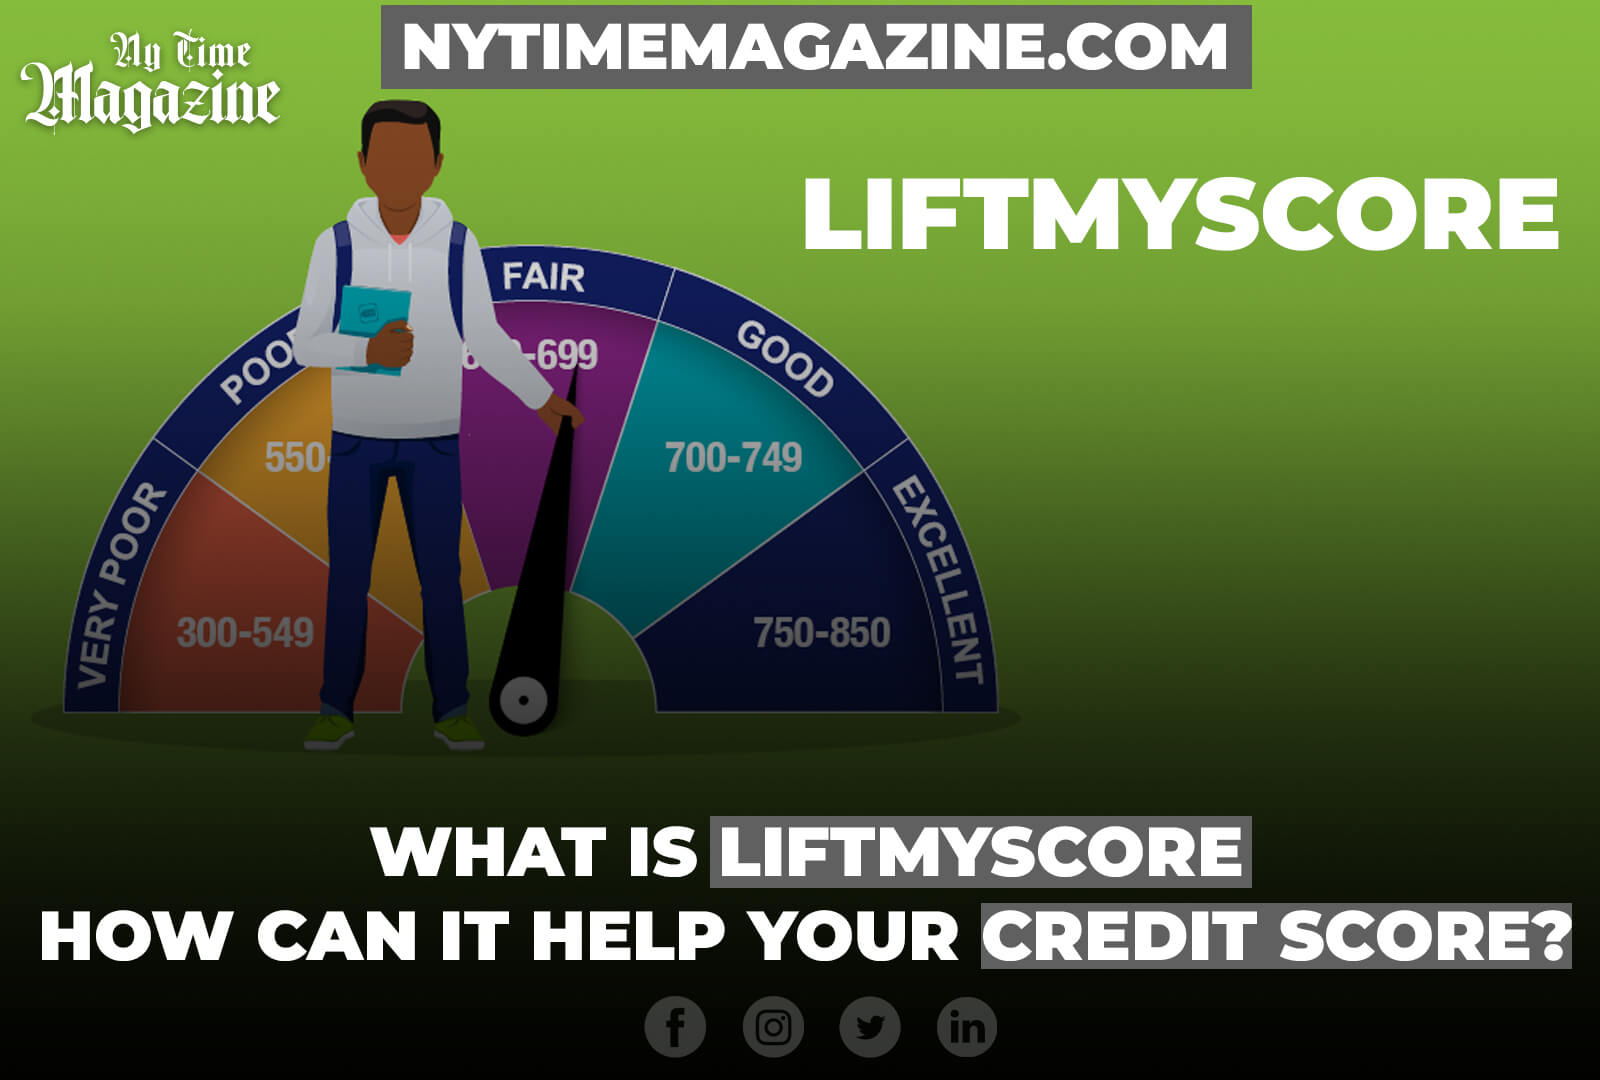 What Is Liftmyscore And How Can It Help Your Credit Score?